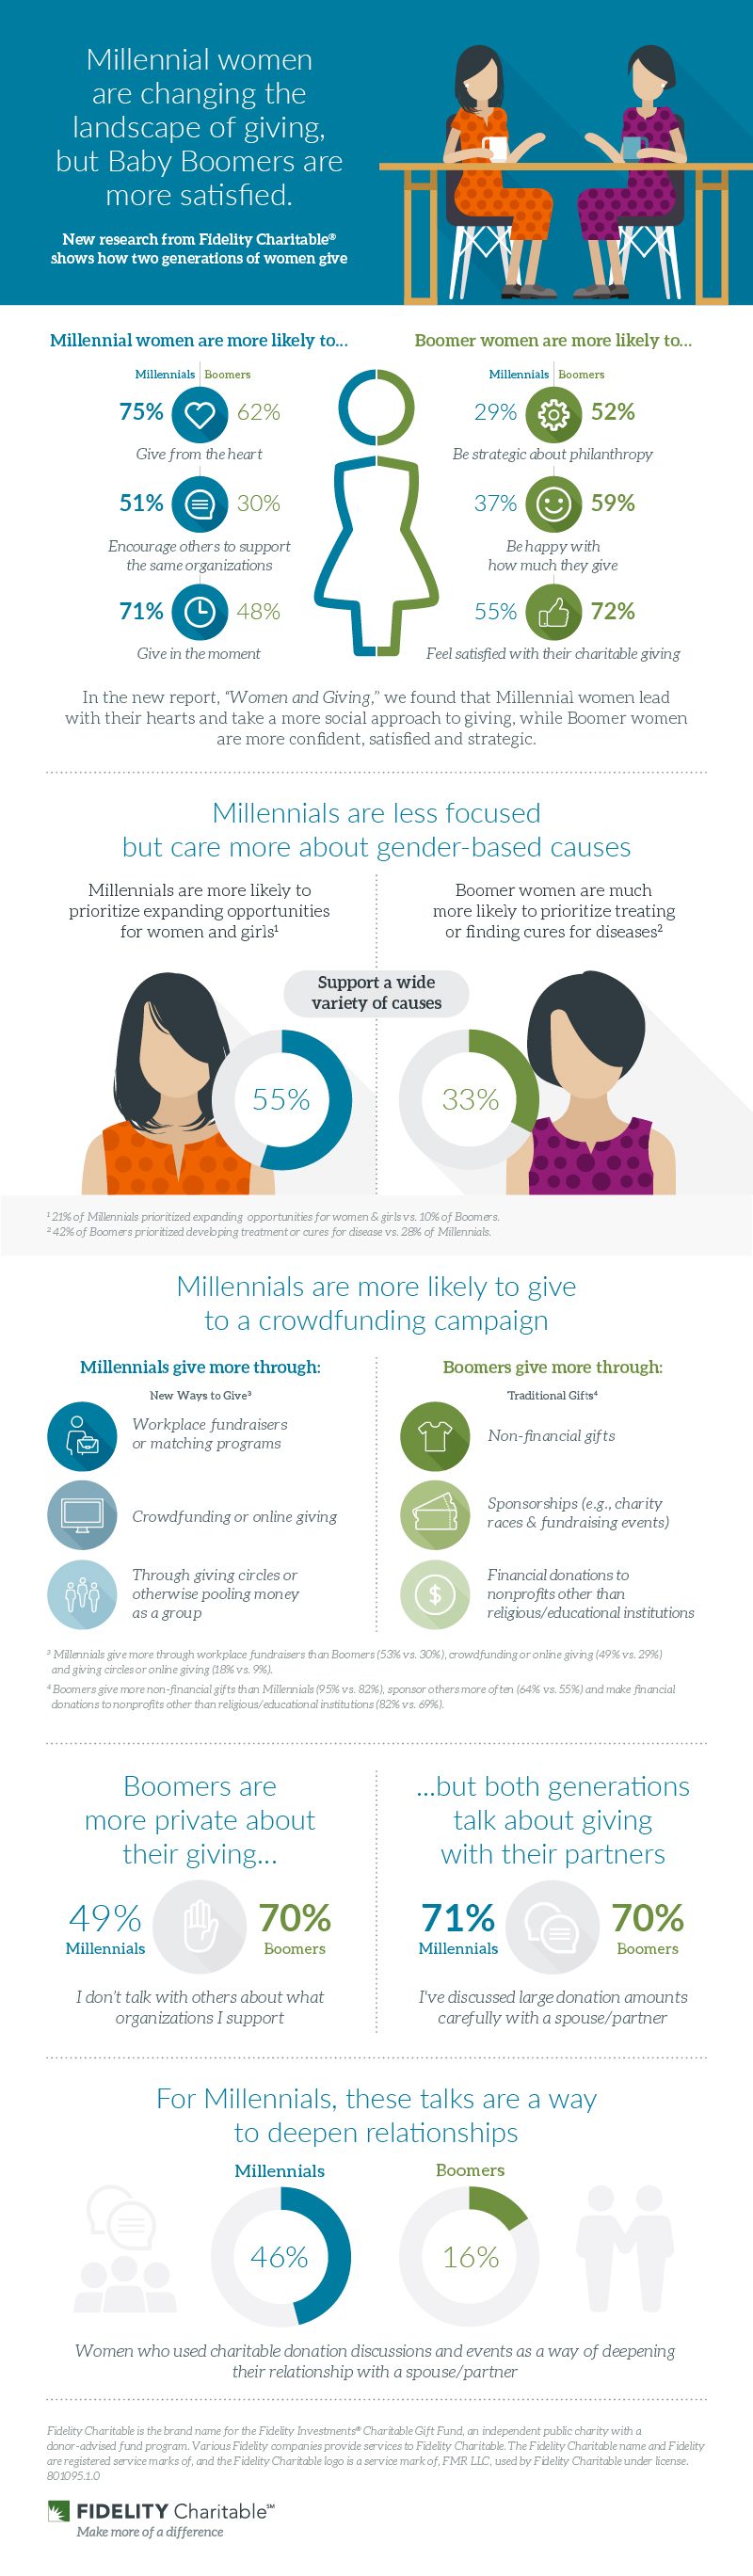 Our infographic shares key differences between Millennial and Baby Boomer women and their giving.